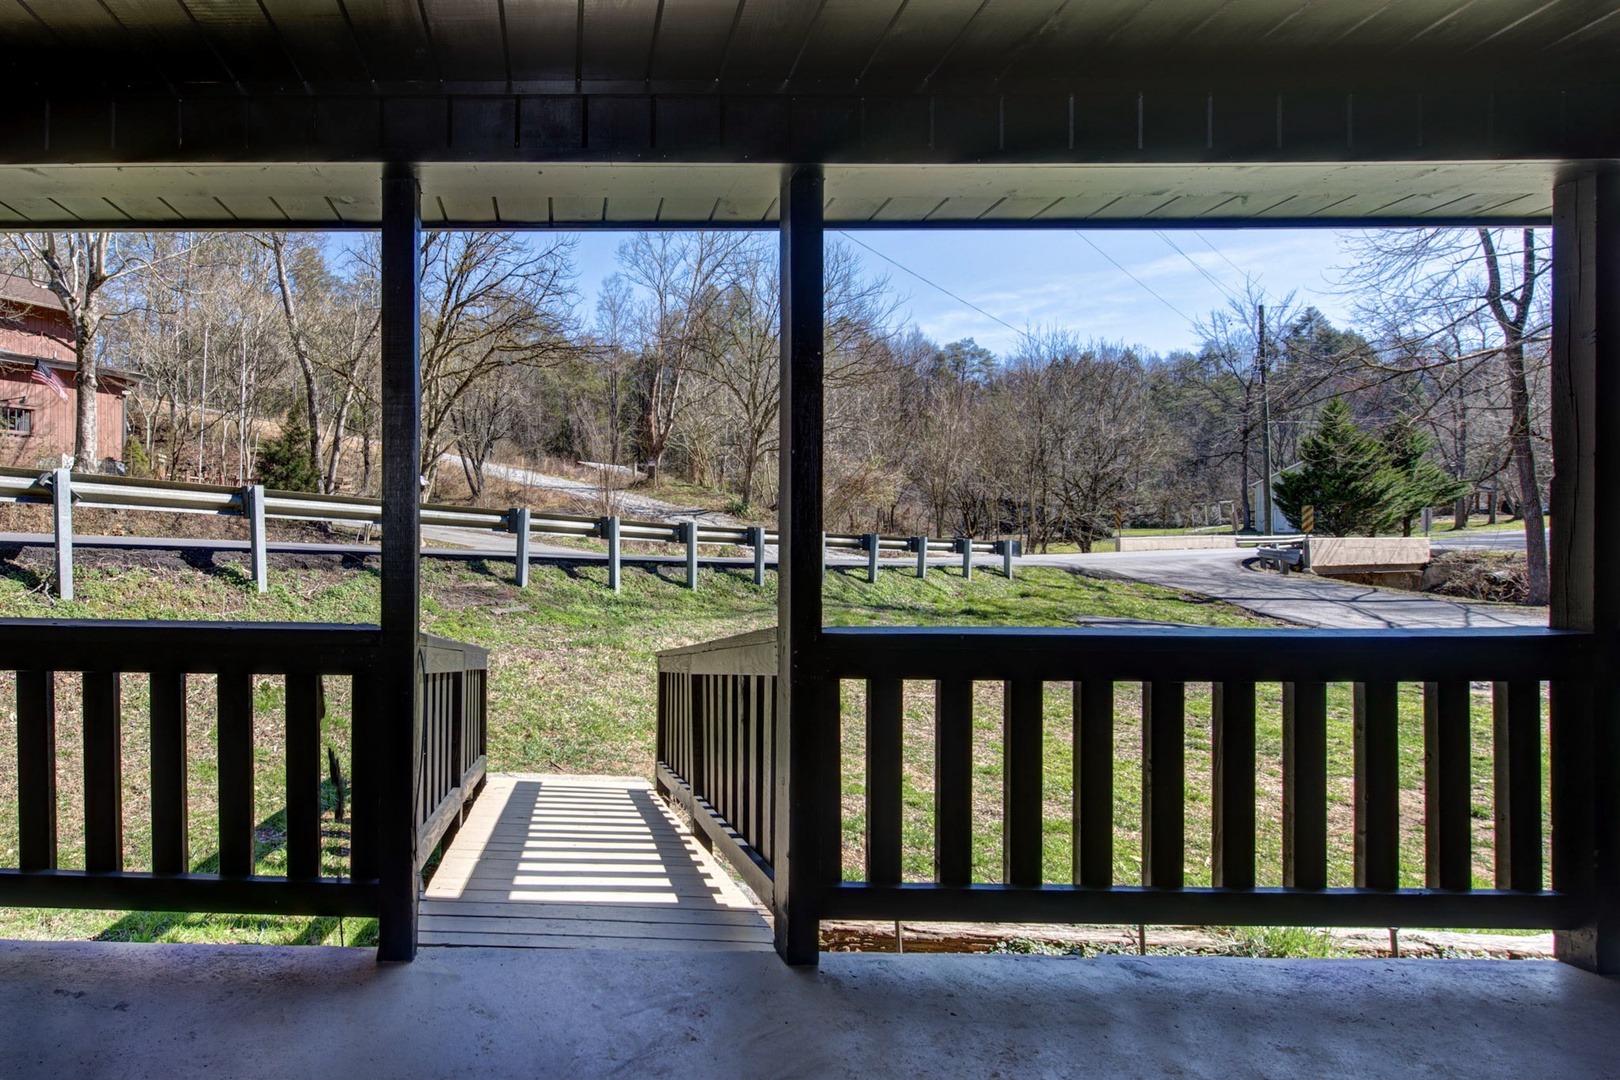 Savor your coffee or tea on the porch, enveloped by scenic views